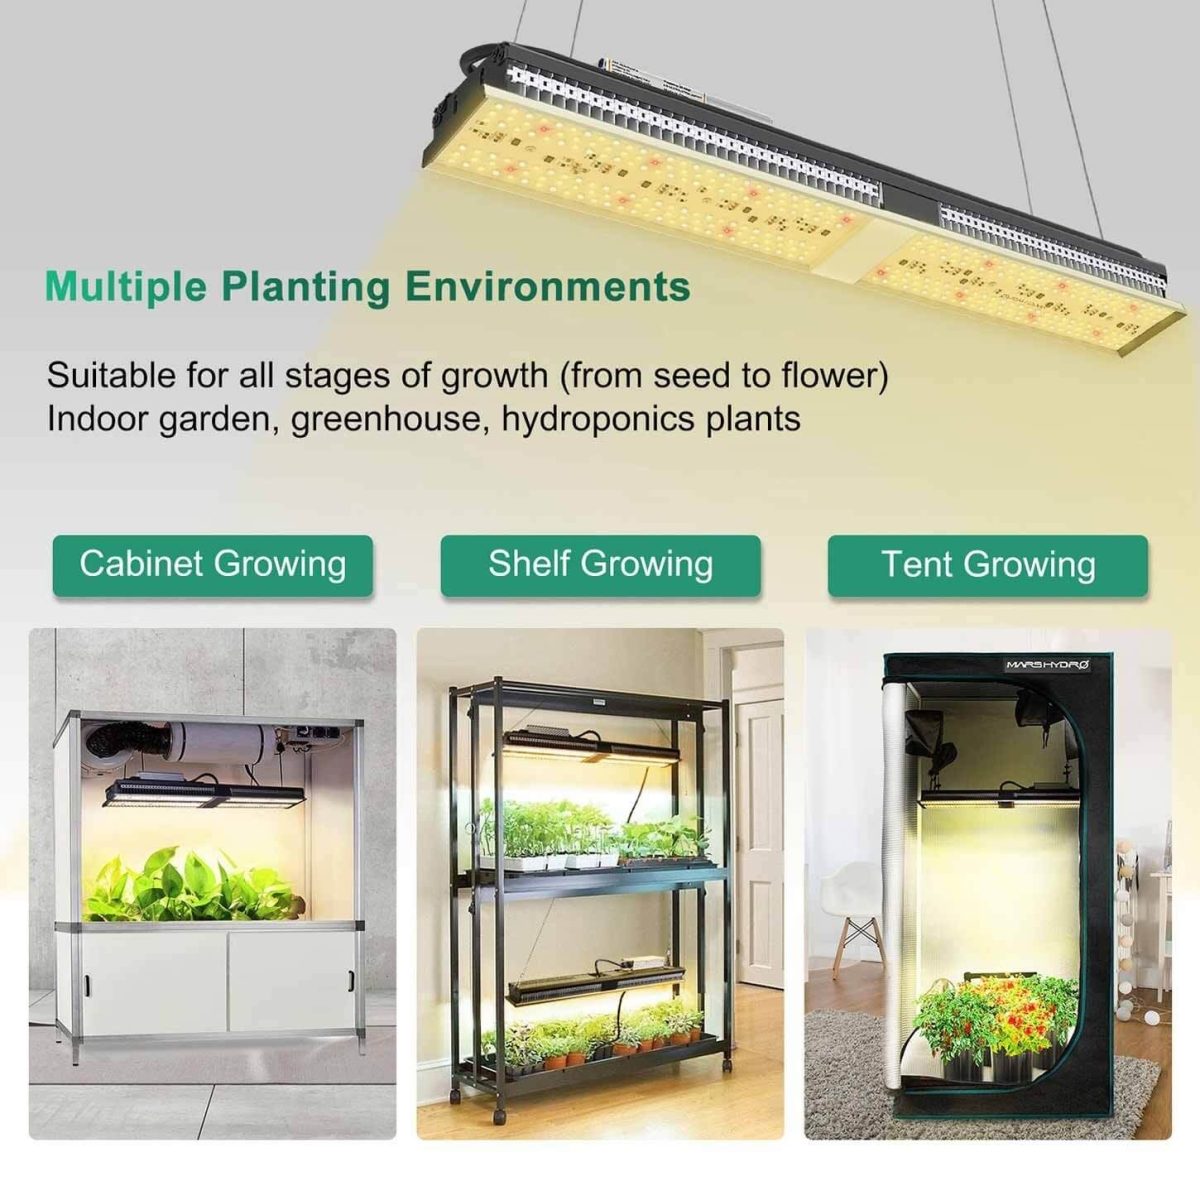 Multiple plantsing environments, sp150 led is suitable for all stages of growth, cabinet, shelf, tent growing